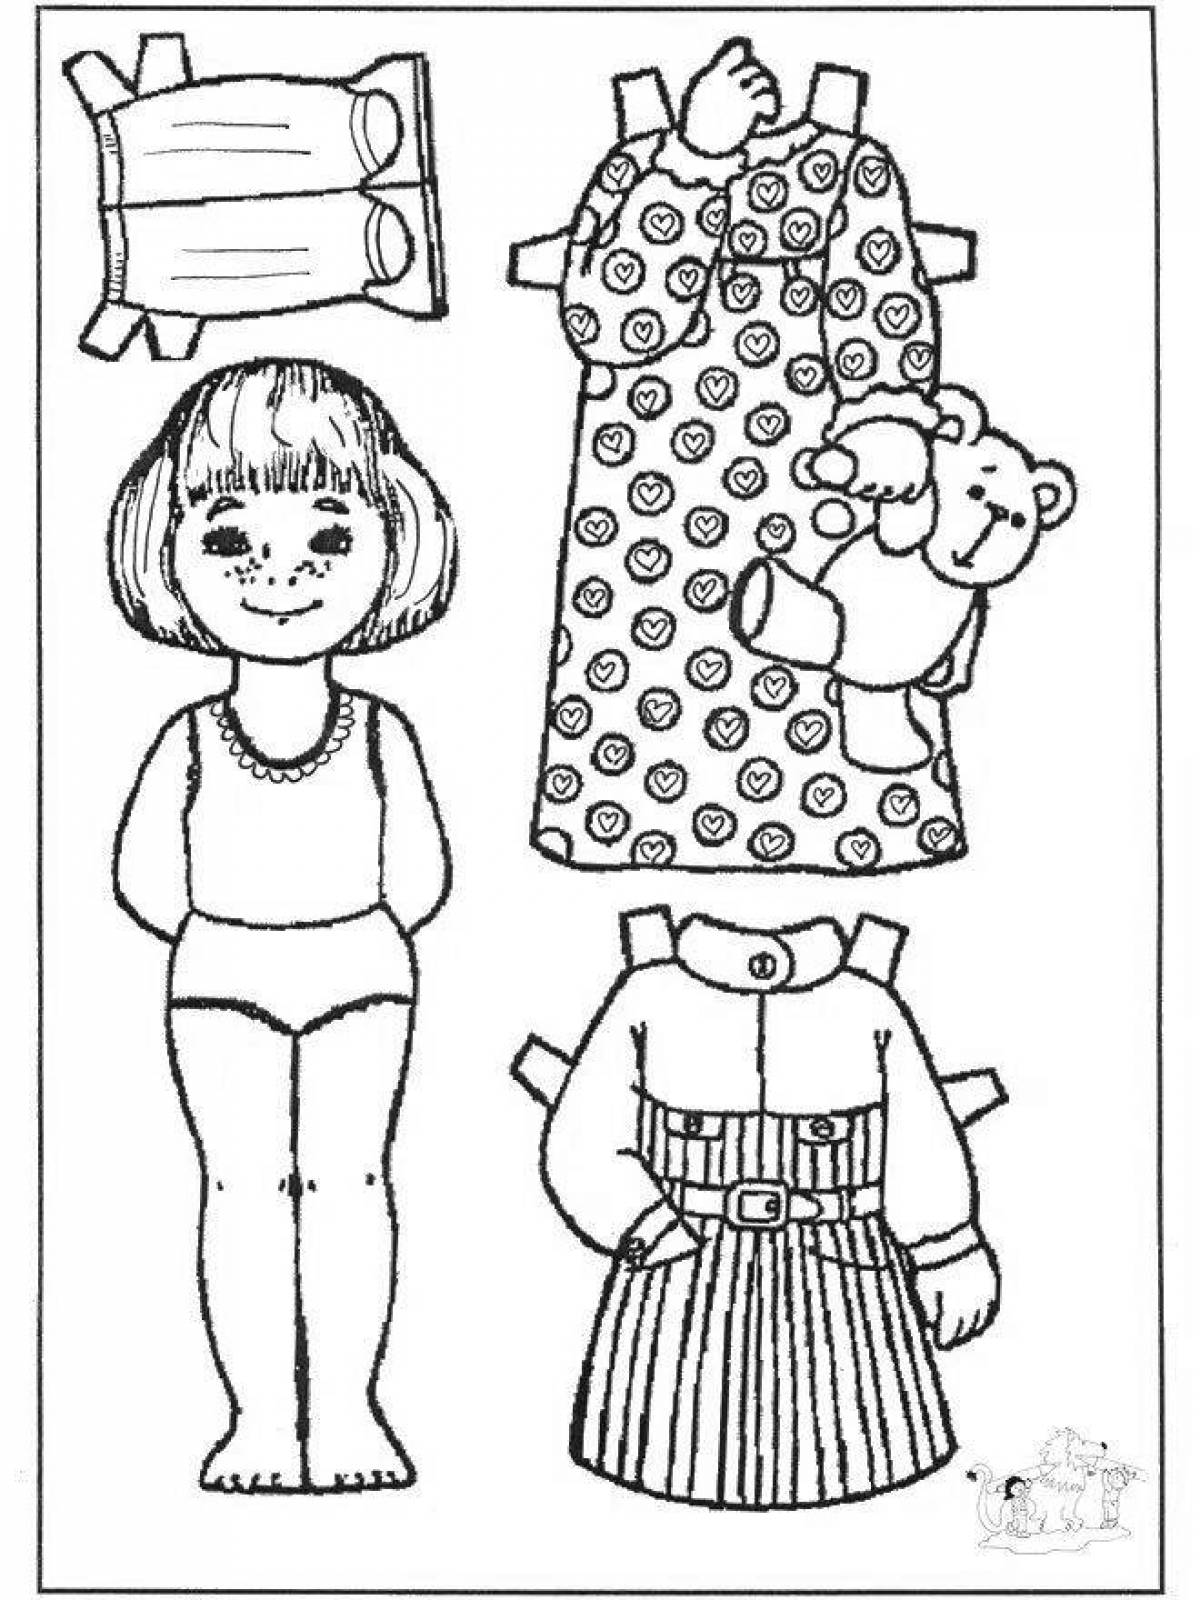 Calm jersey coloring page